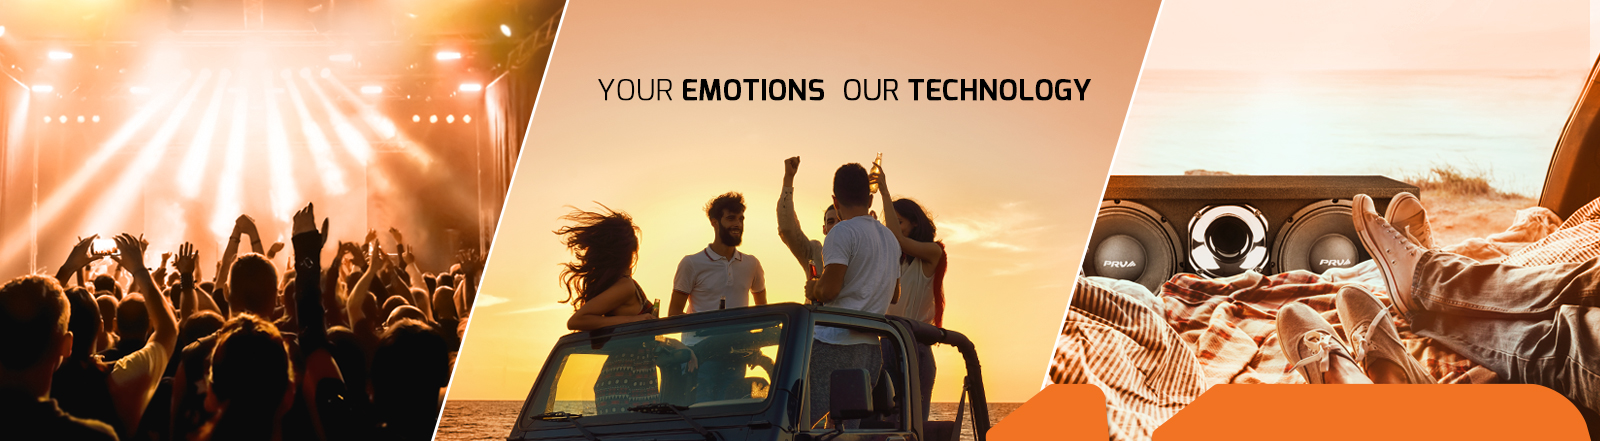 Your-Emotions-Our-Technology---Image